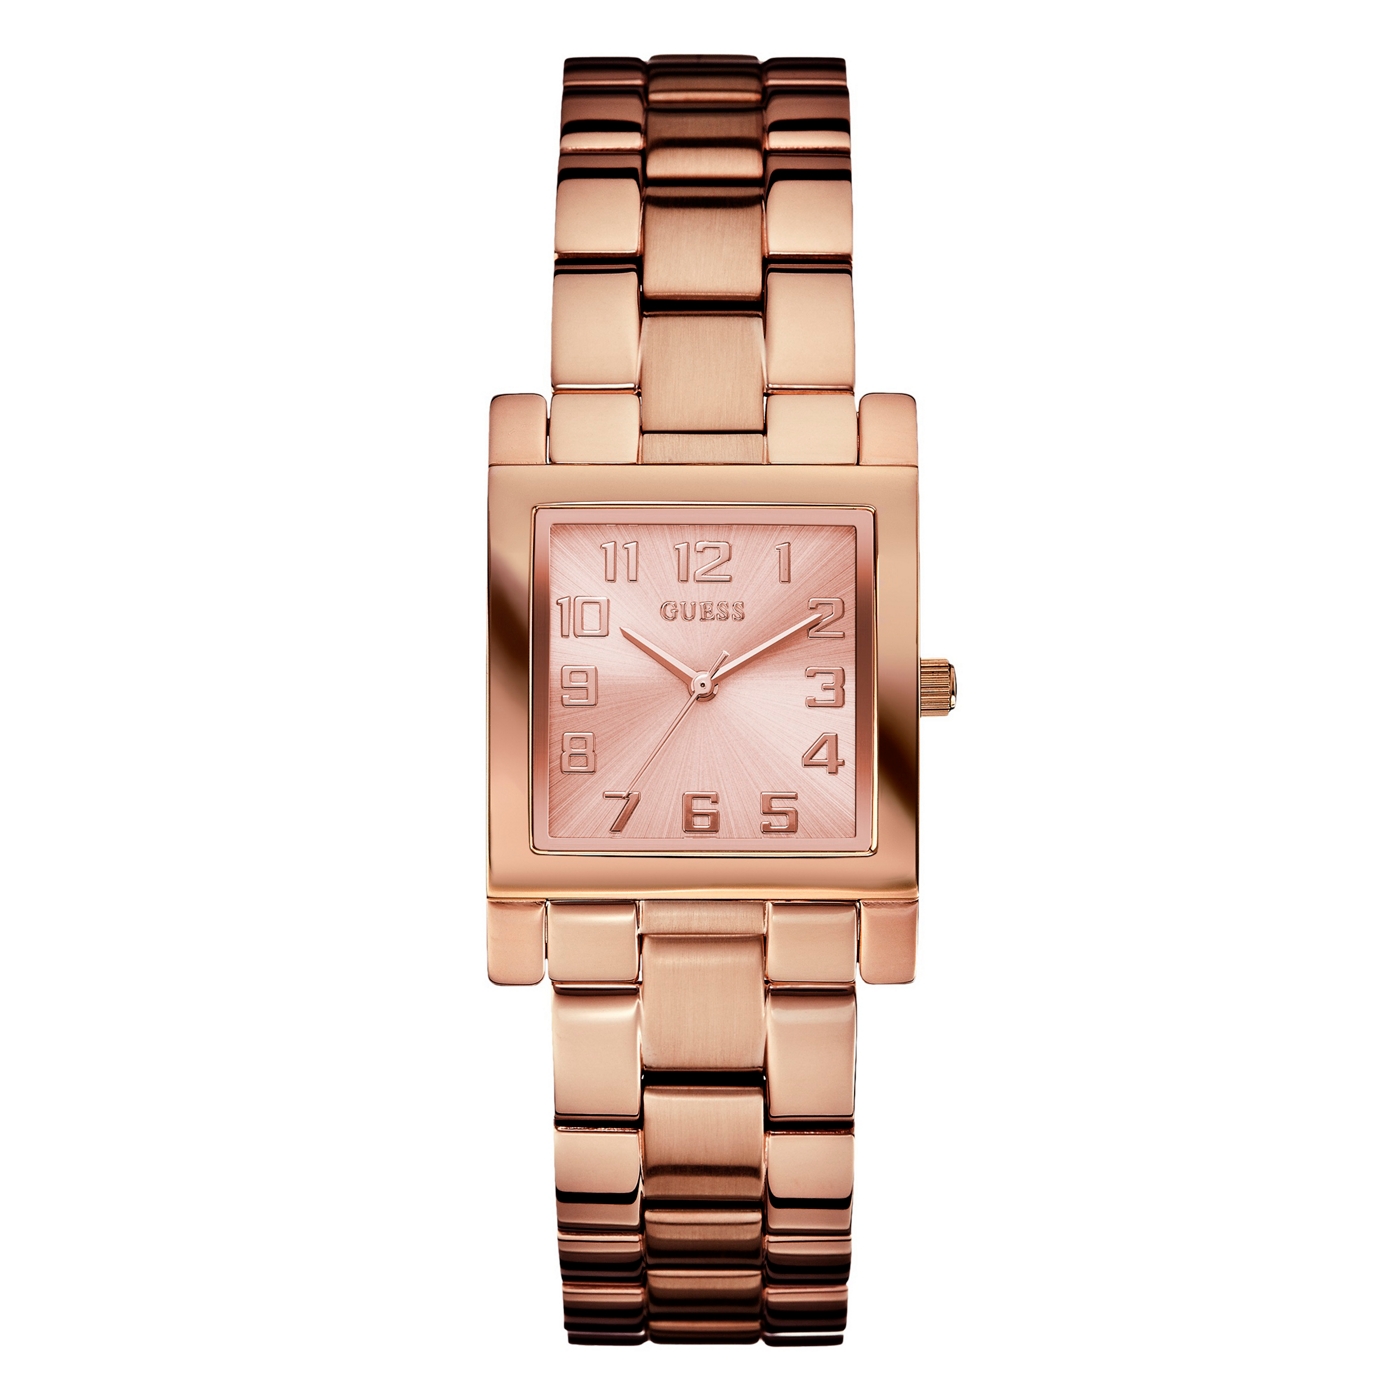 Guess Online exclusive ladies bronze brushed square dial watch